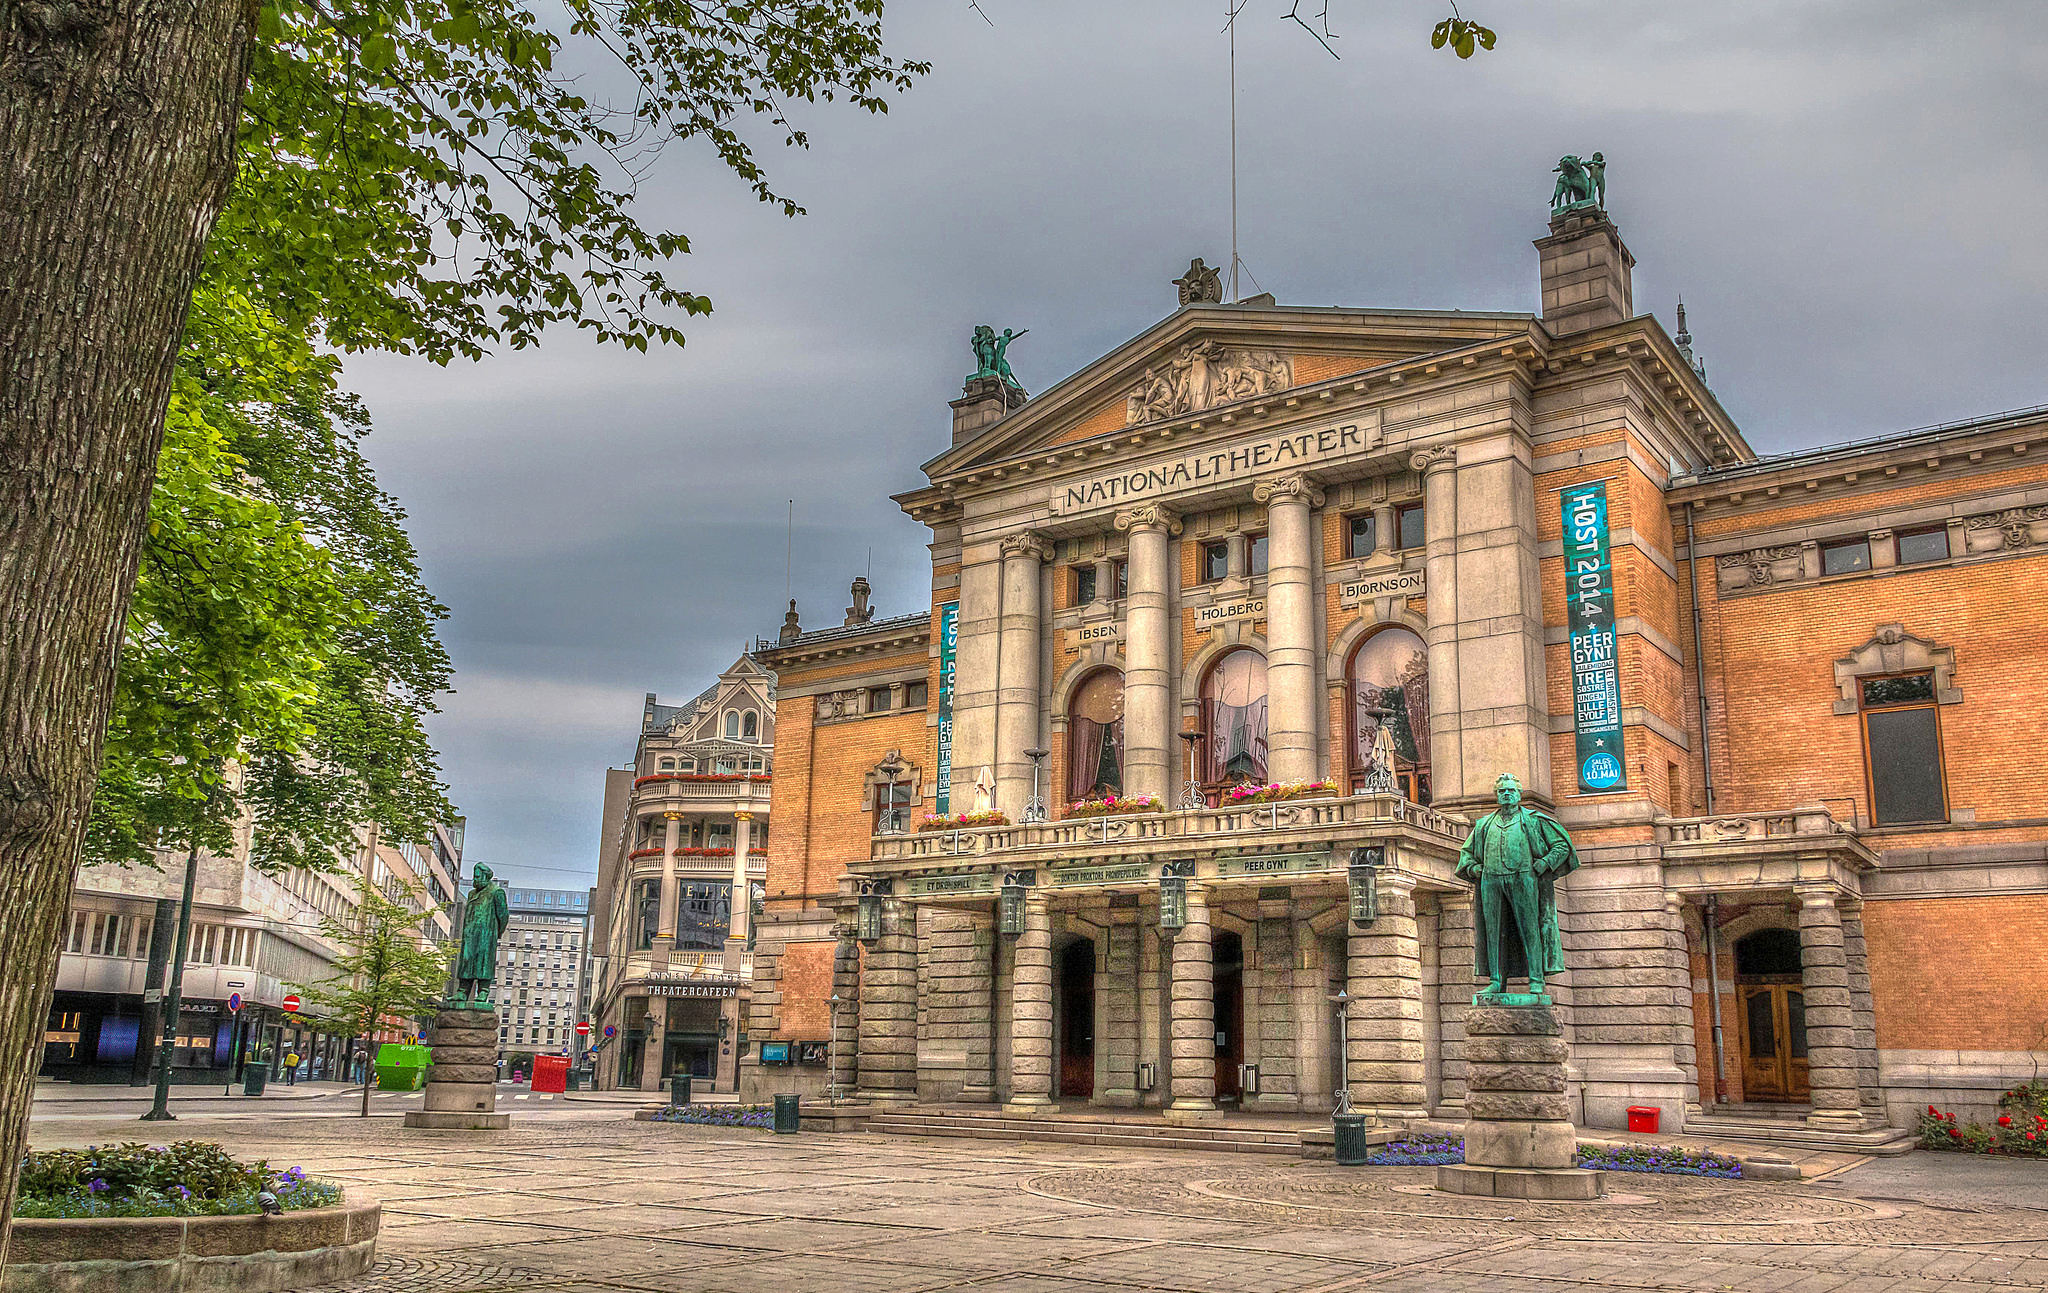 oslo, photography, hdr, architecture, building, city, norway, square, theatre